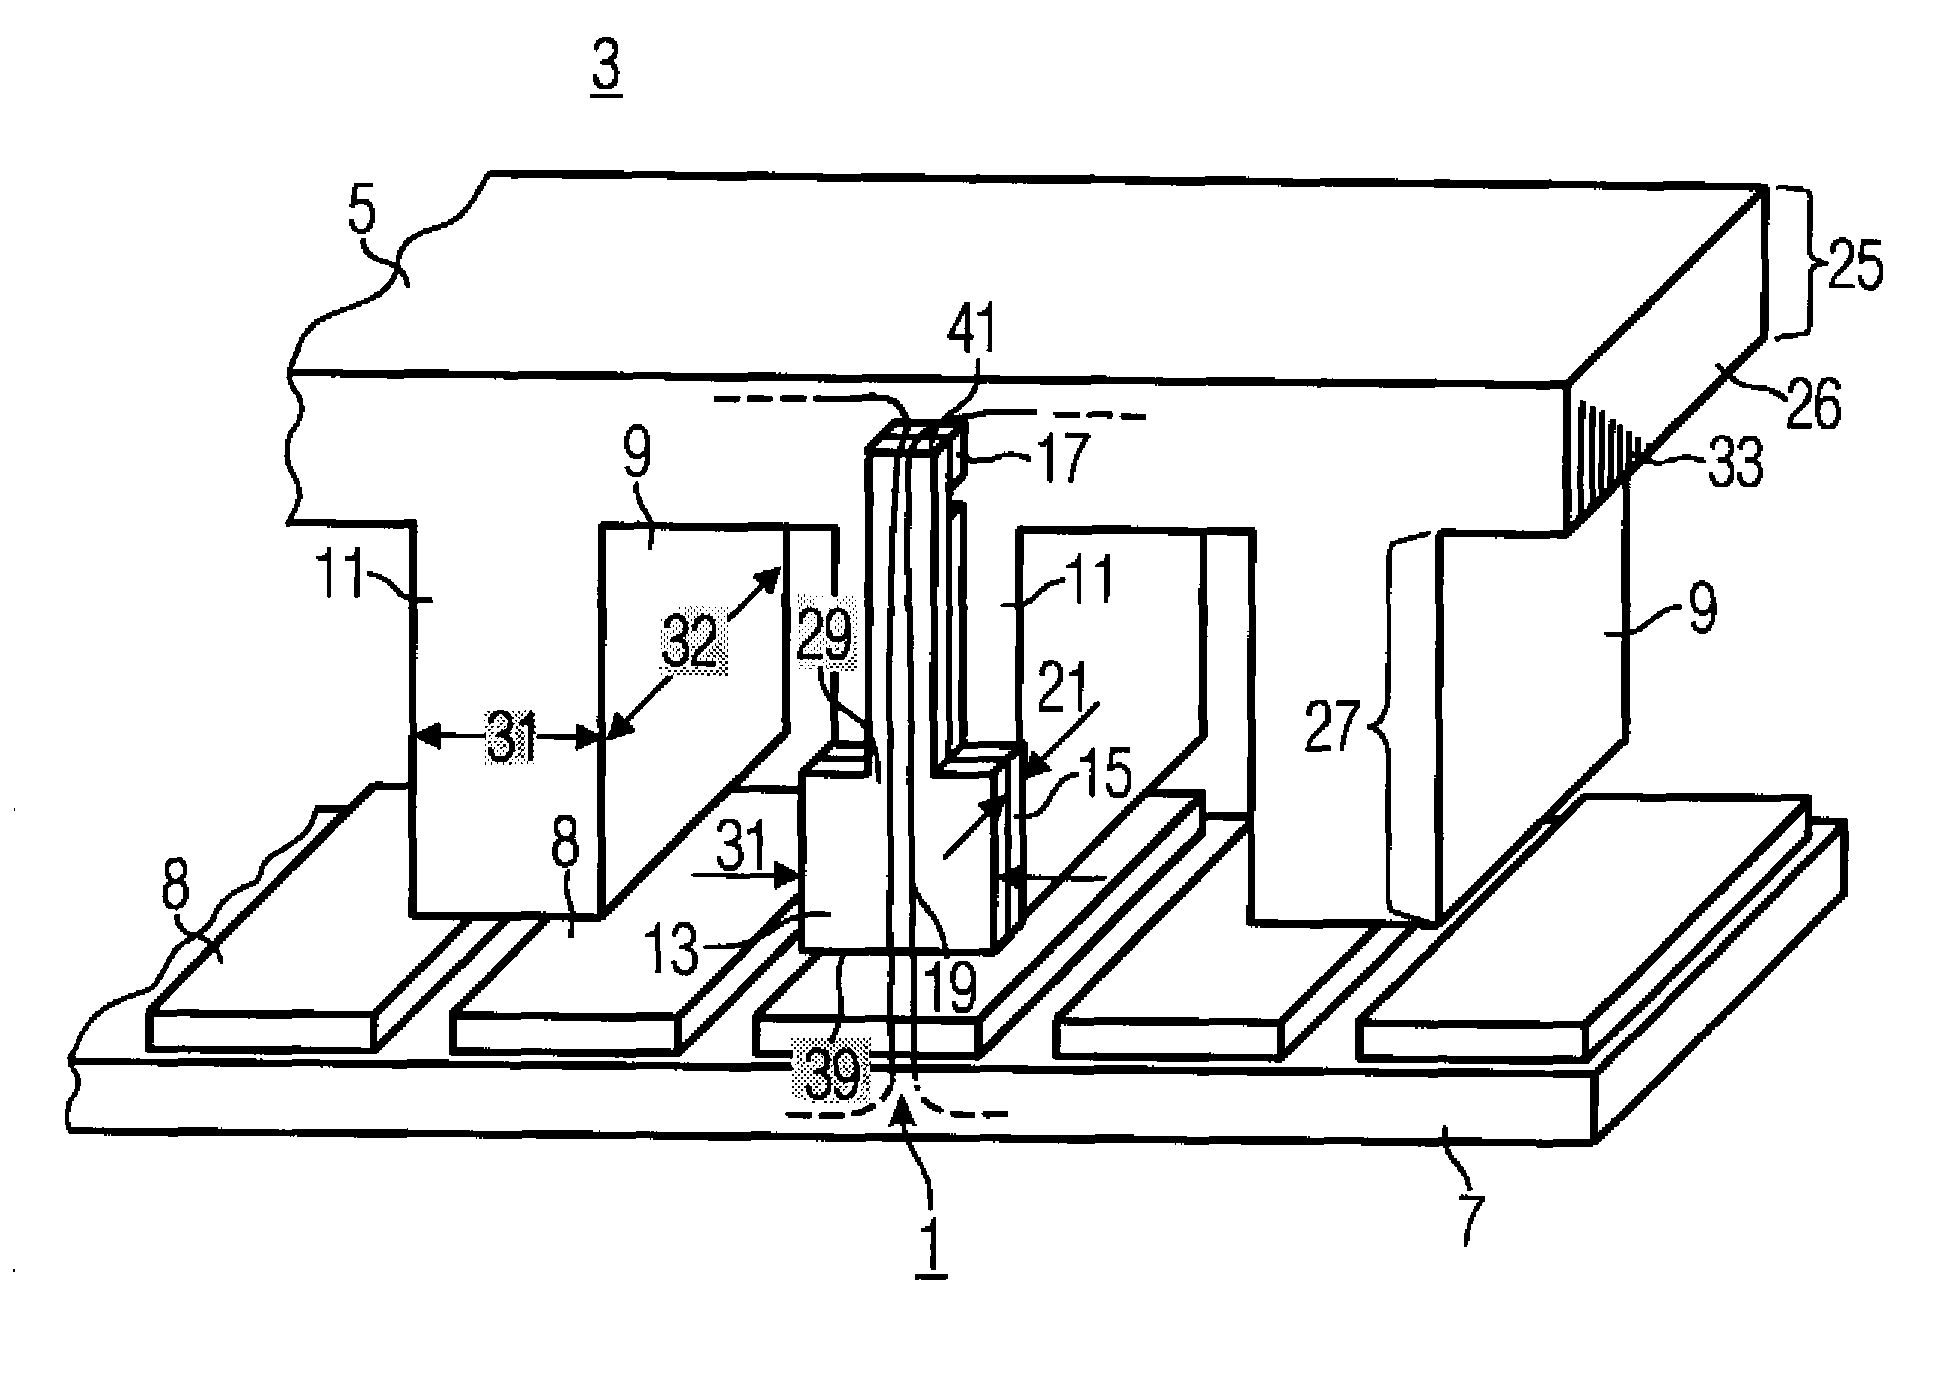 Sensor device for measuring a magnetic field